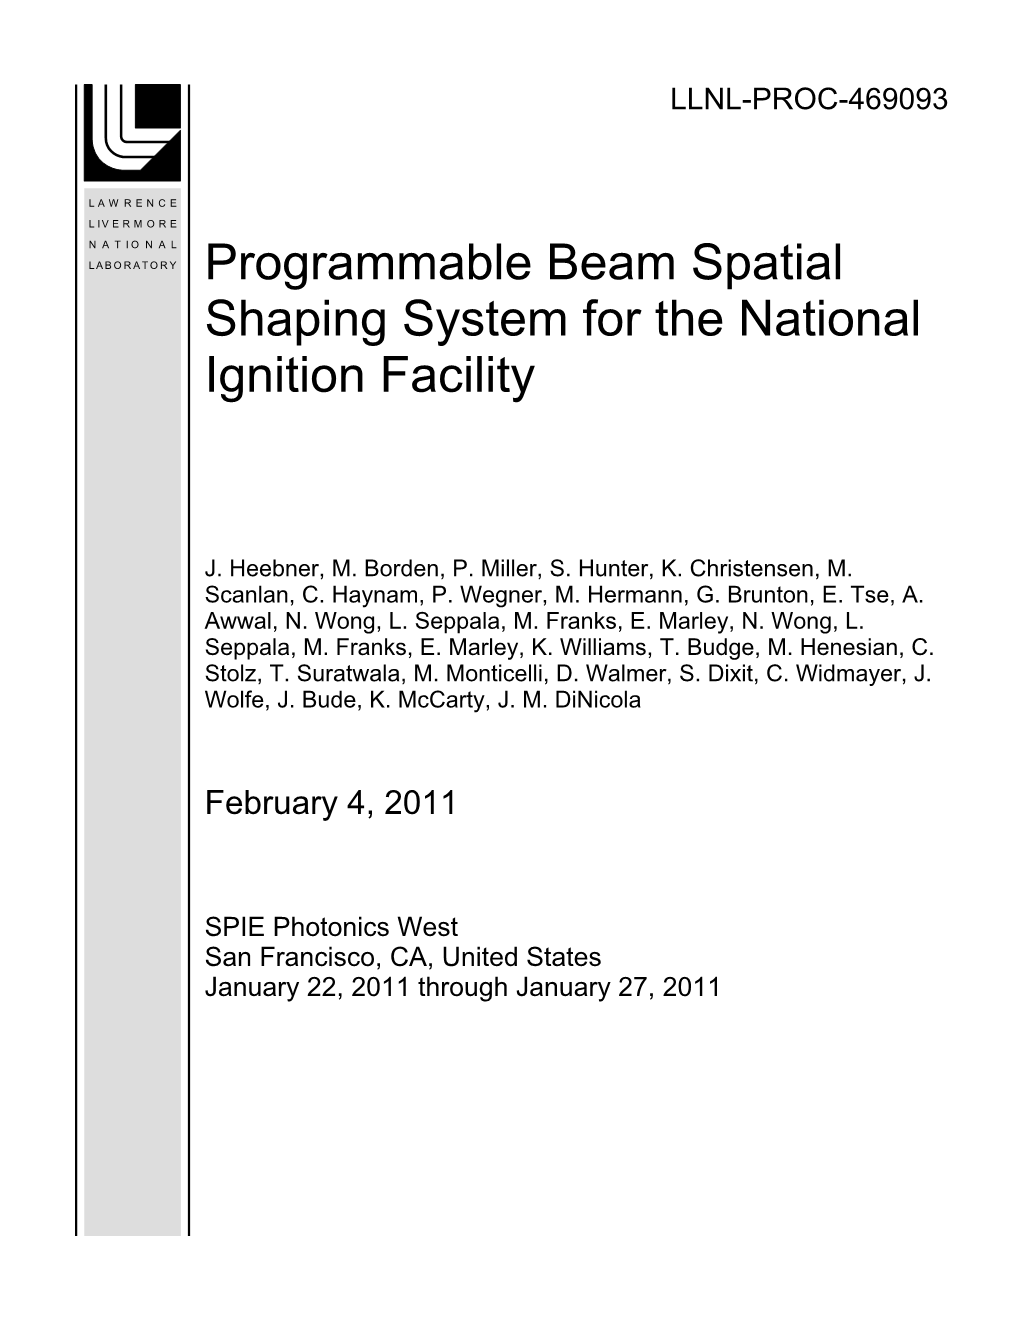 Programmable Beam Spatial Shaping System for the National Ignition Facility